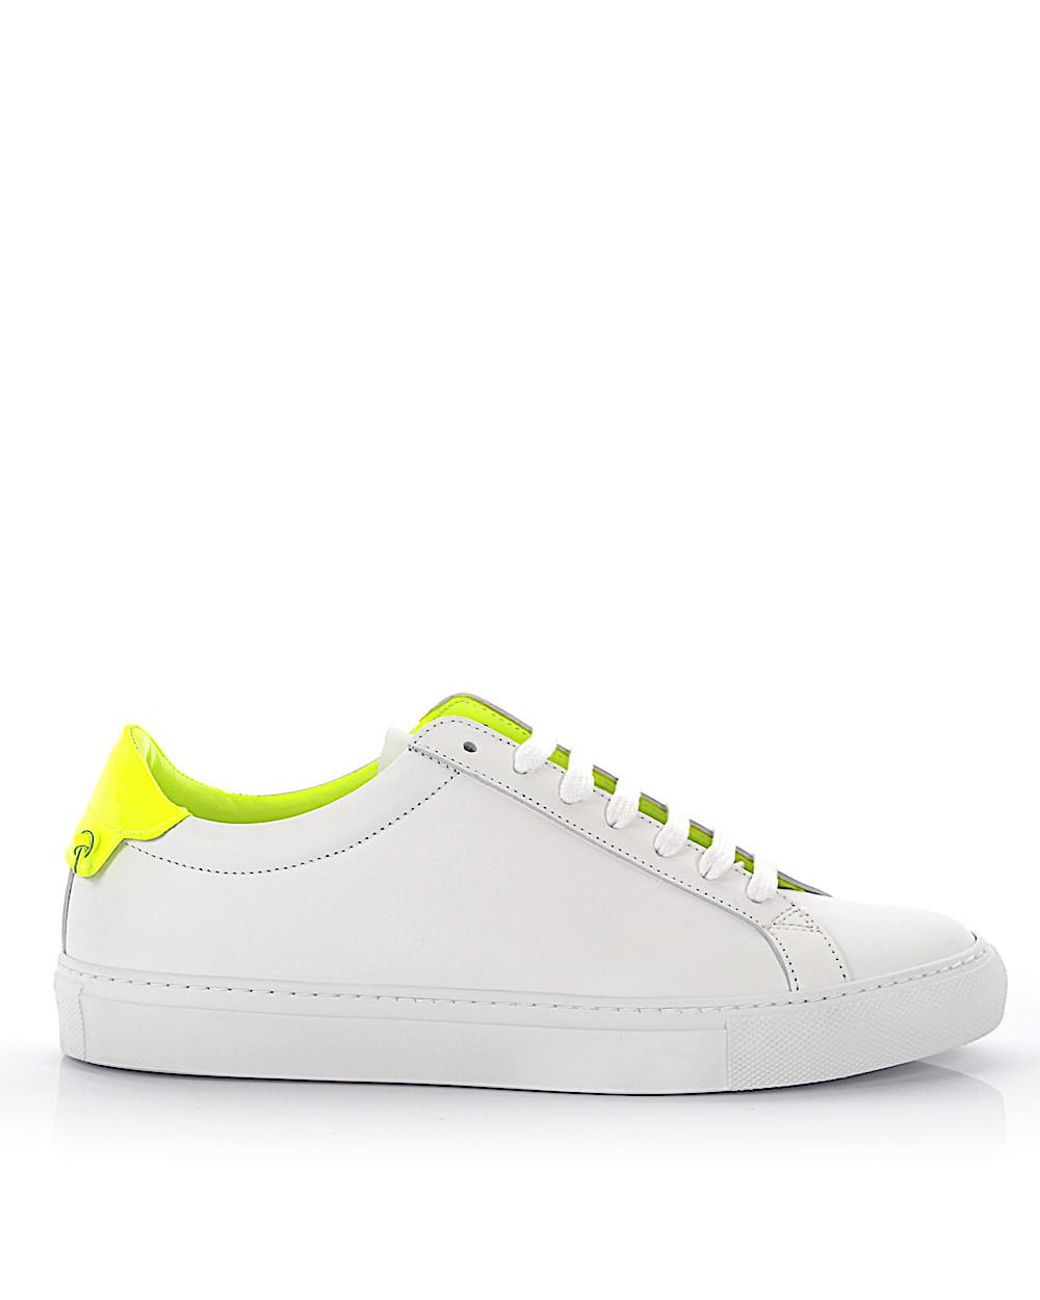 Givenchy Sneakers Urban Knots Leather White Neon Yellow for Men | Lyst